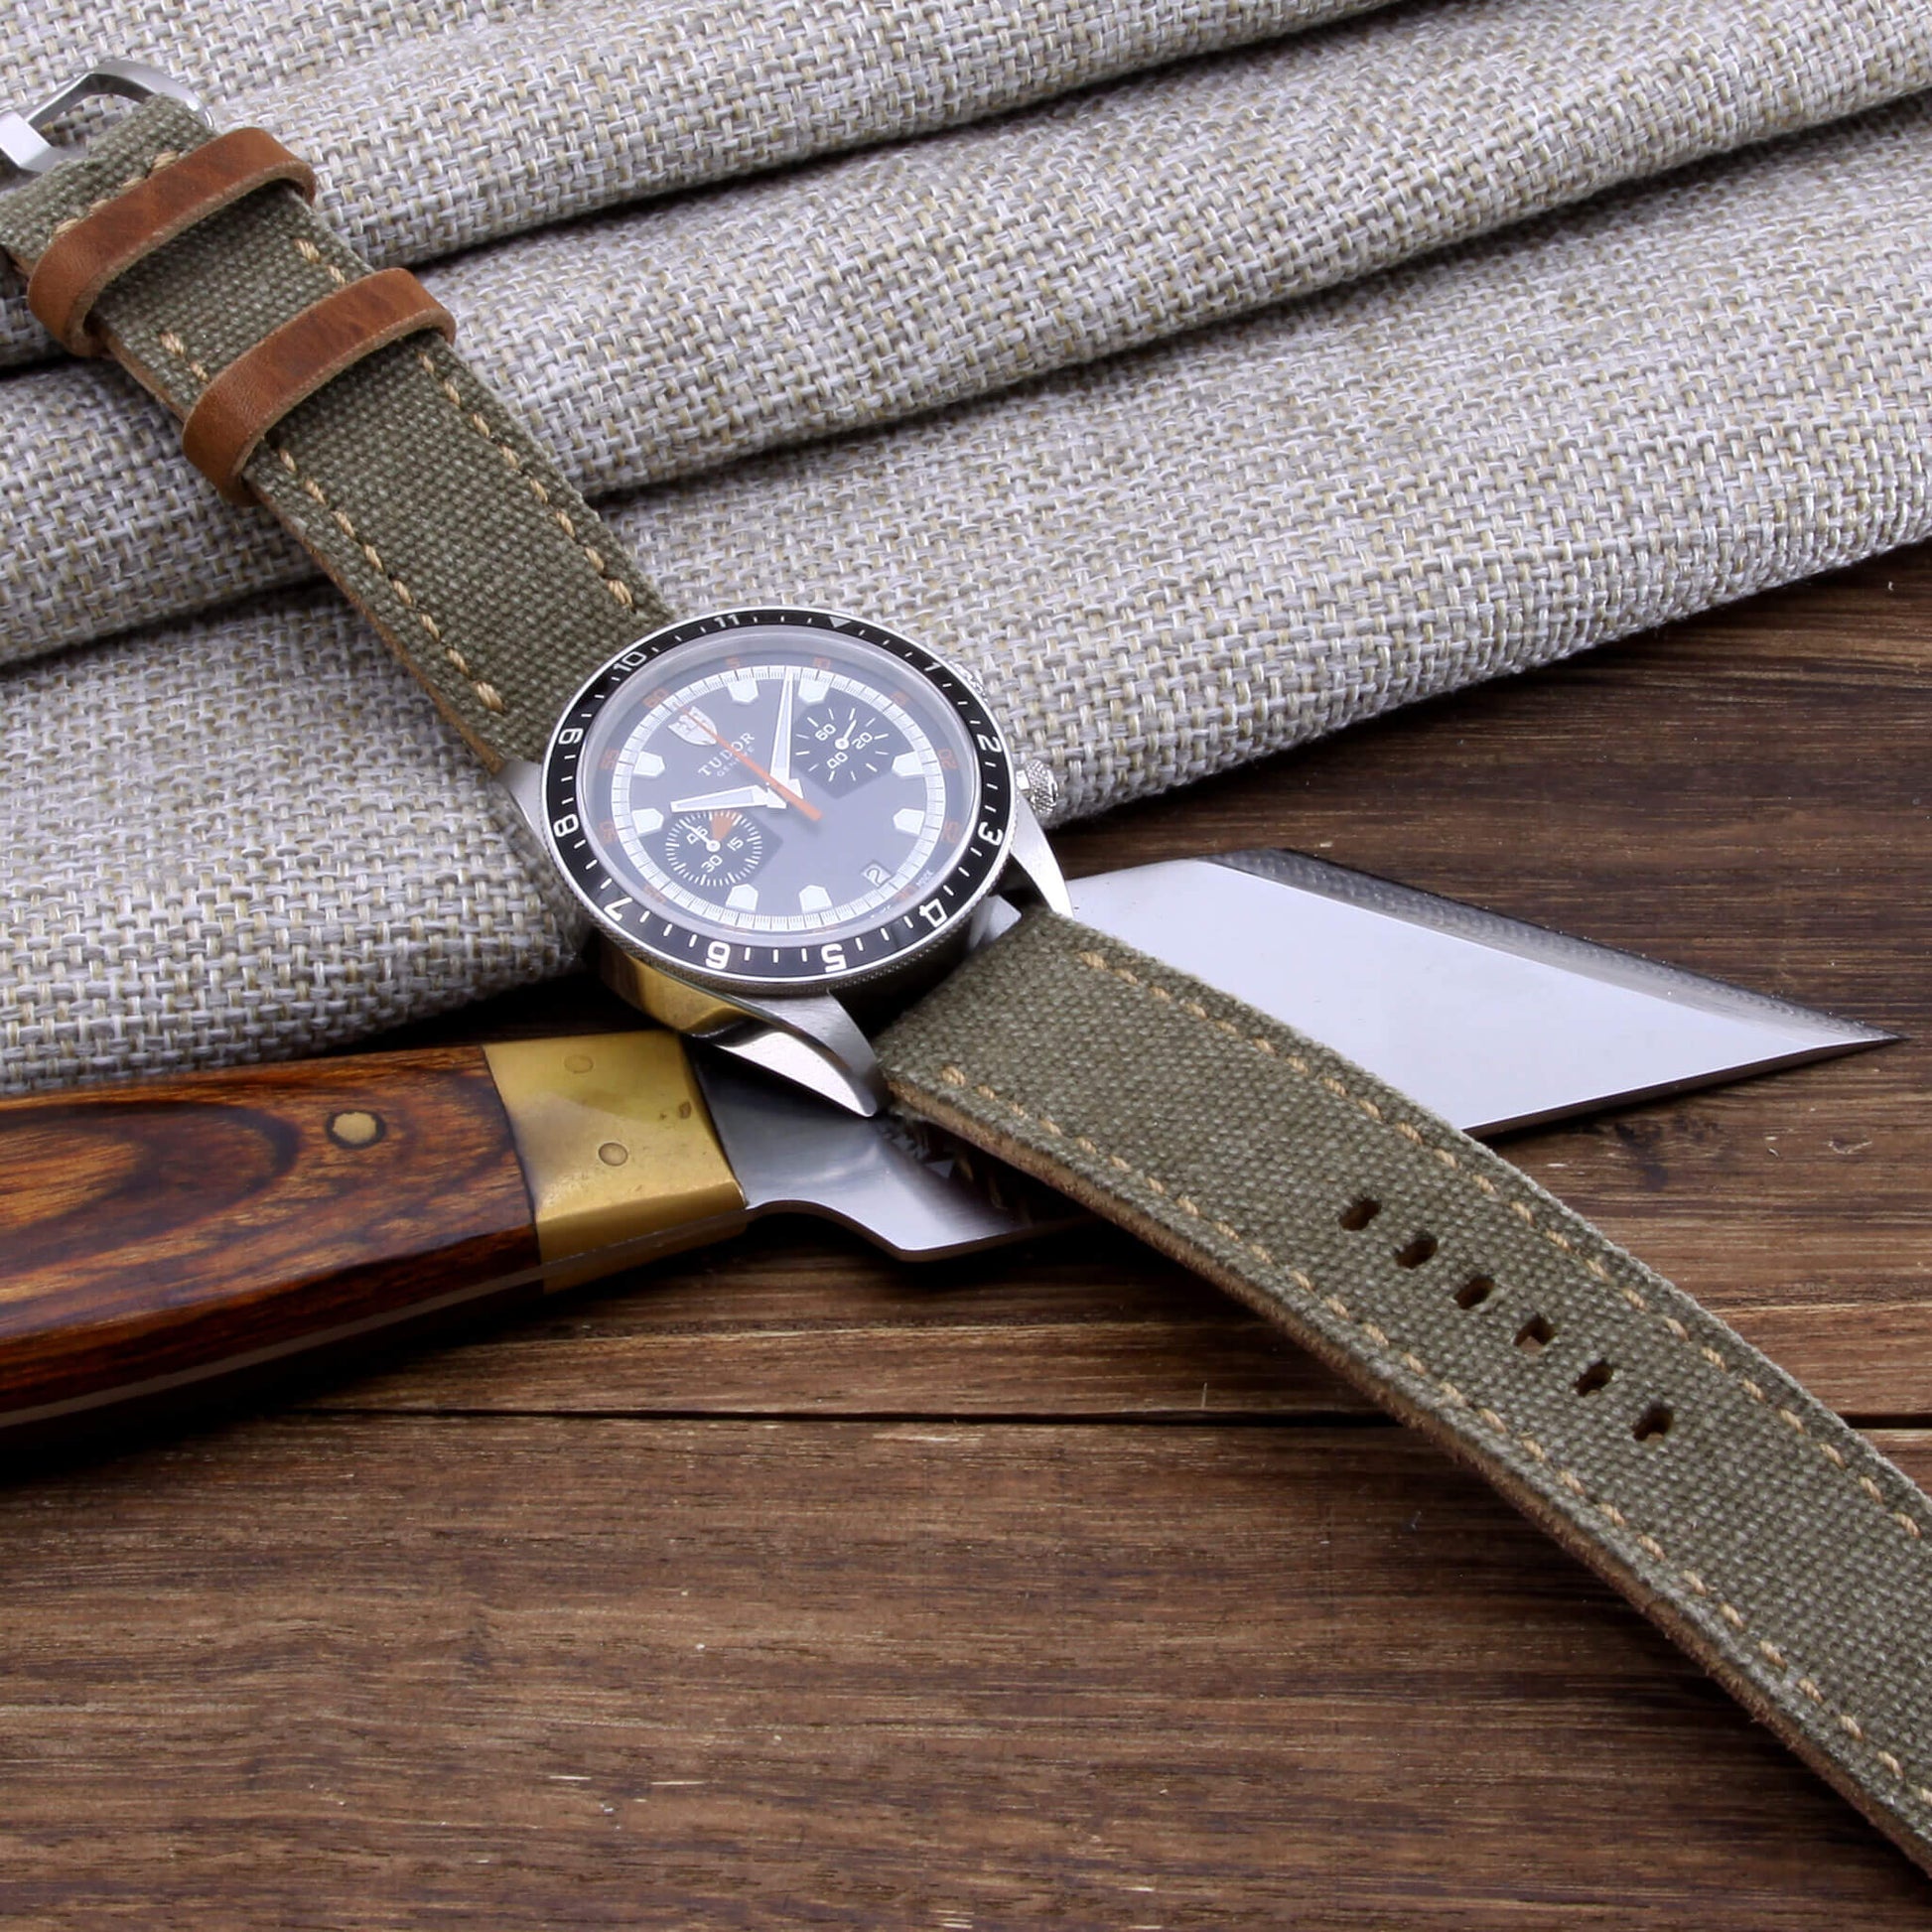 5th View of 2-Piece Full Stitch Leather Watch Strap, made with Military Green Canvas and Italian veg-tanned leather lining, handcrafted by Cozy Handmade